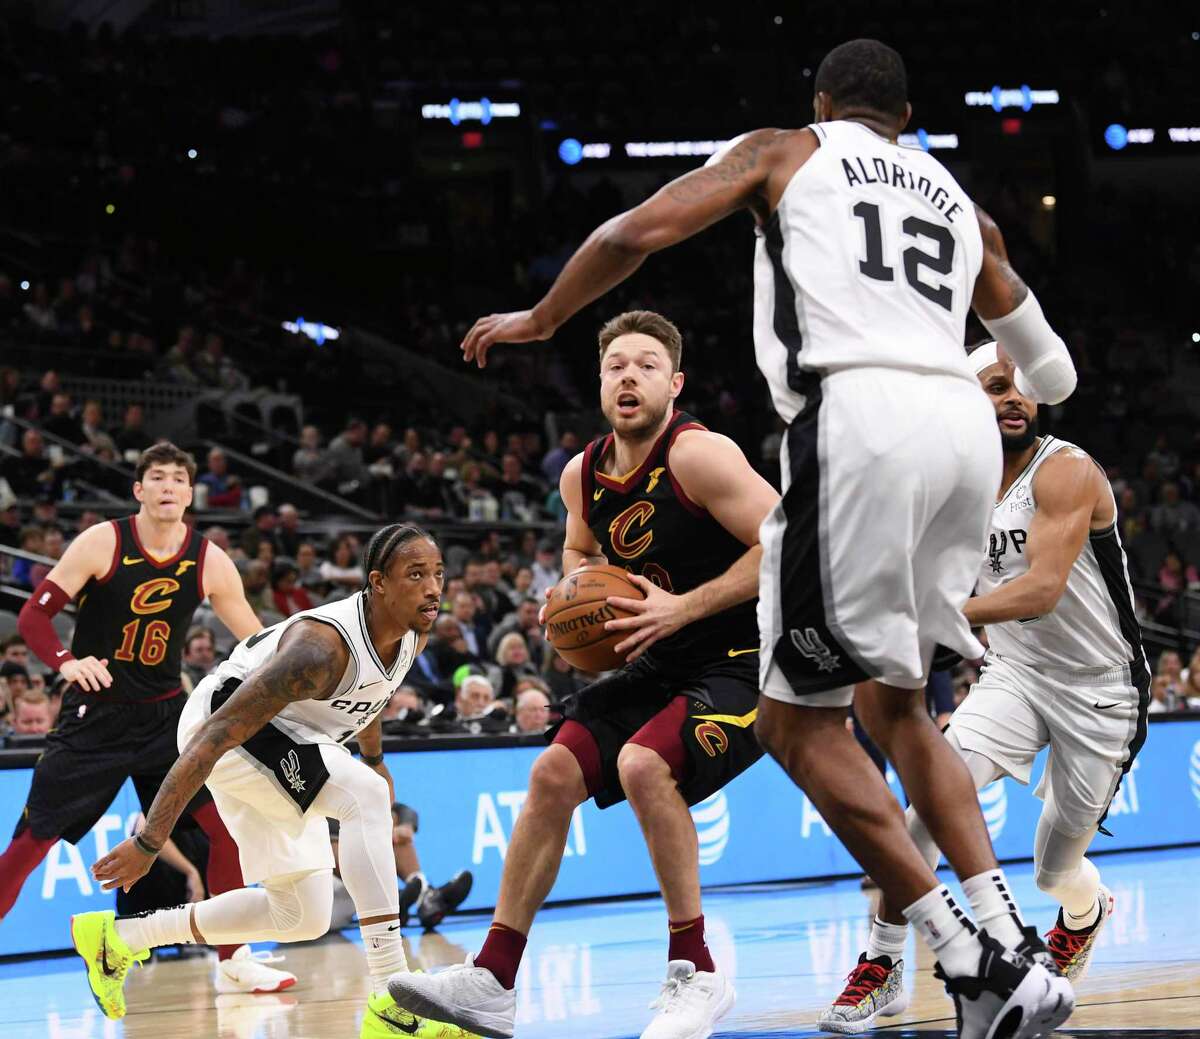 Matthew Dellavedova of the Cleveland Cavaliers drives to the basket as DeMar DeRozan left, LaMarcus Aldridge (12) and Patty Mills, right, of the San Antonio Spurs defend during NBA action in the AT&T Center on Thursday, Dec. 12, 2019.